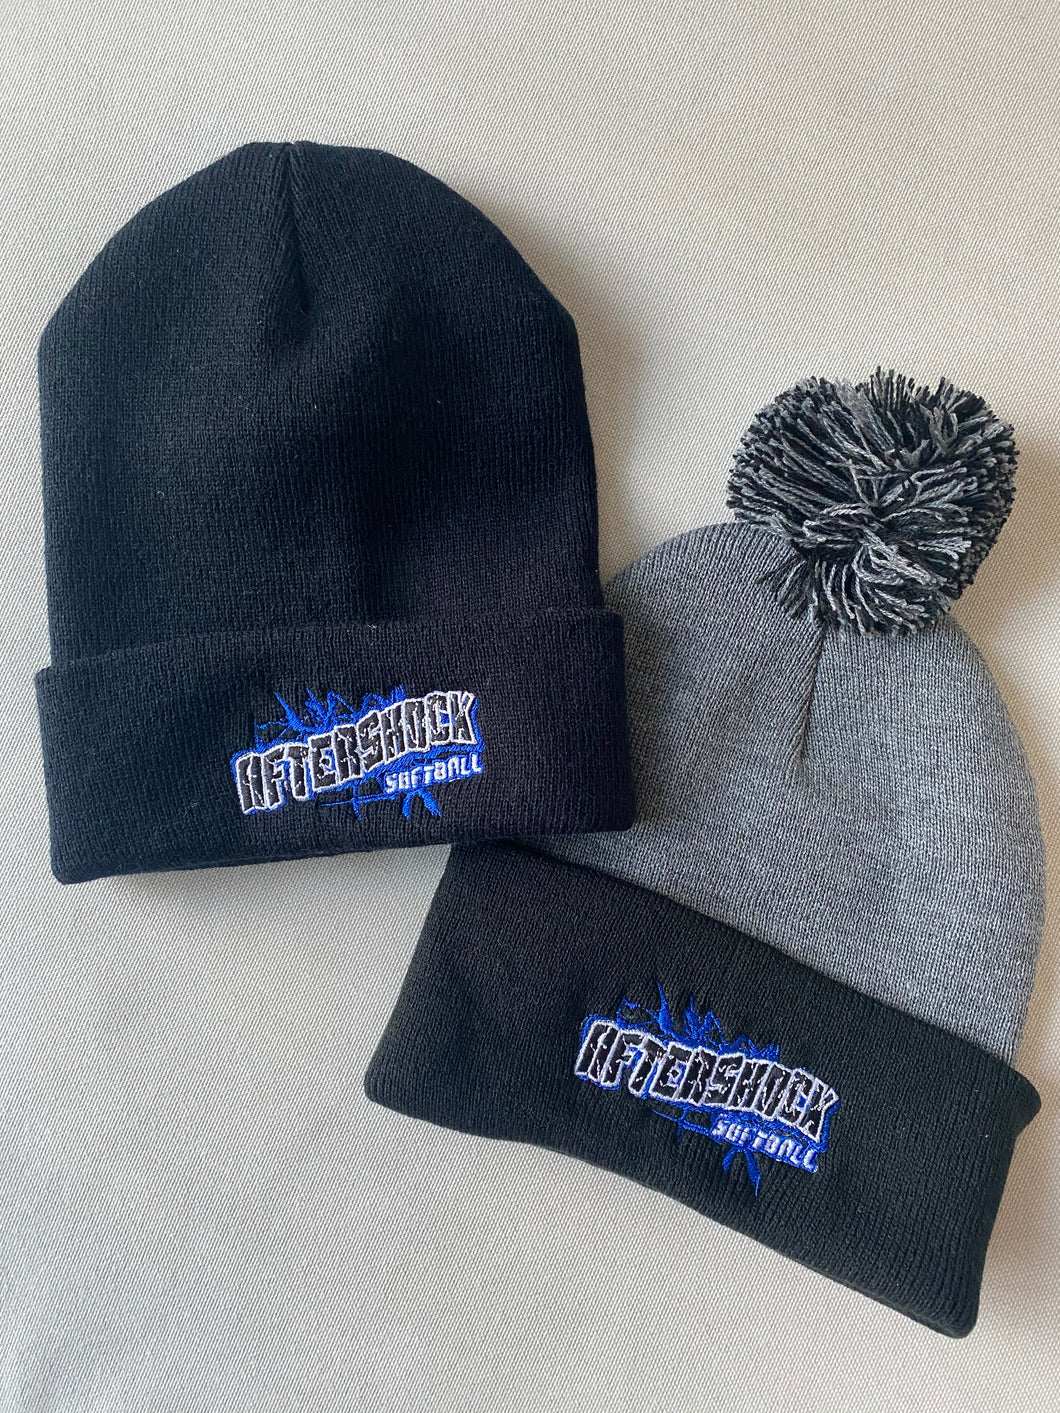 Aftershock Stocking Hats